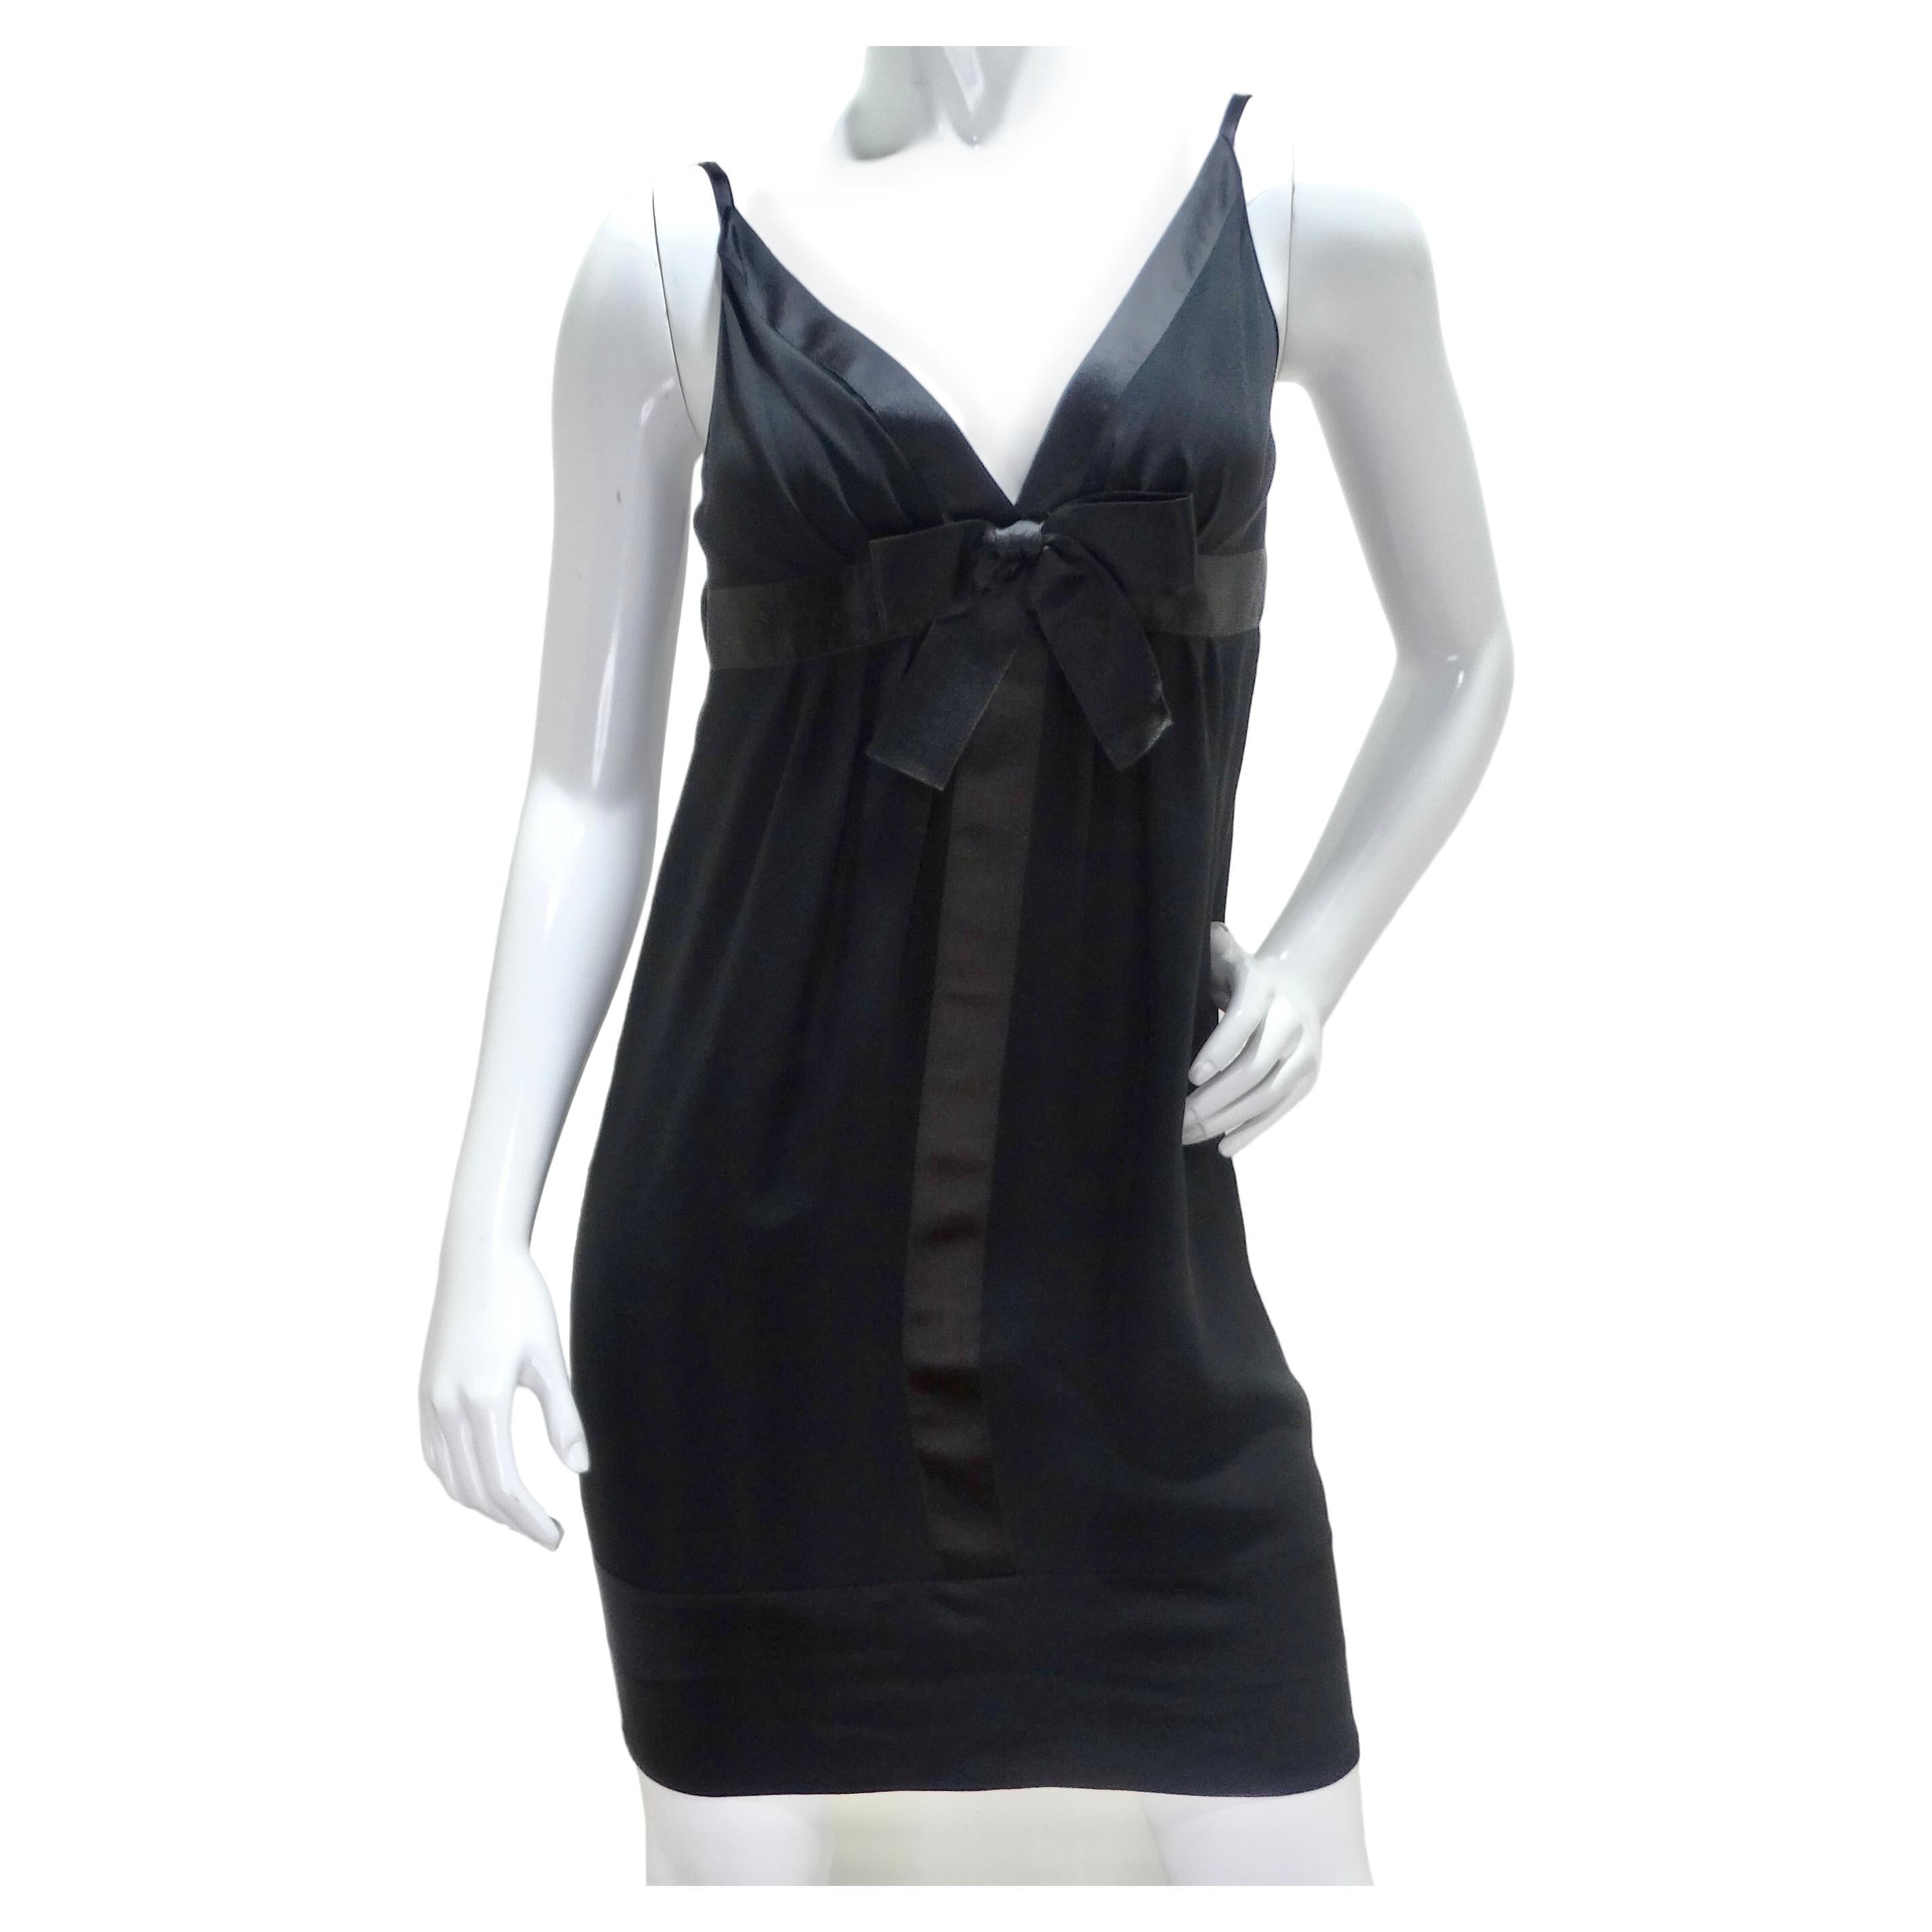 Chanel Dress With Satin Bow - 6 For Sale on 1stDibs